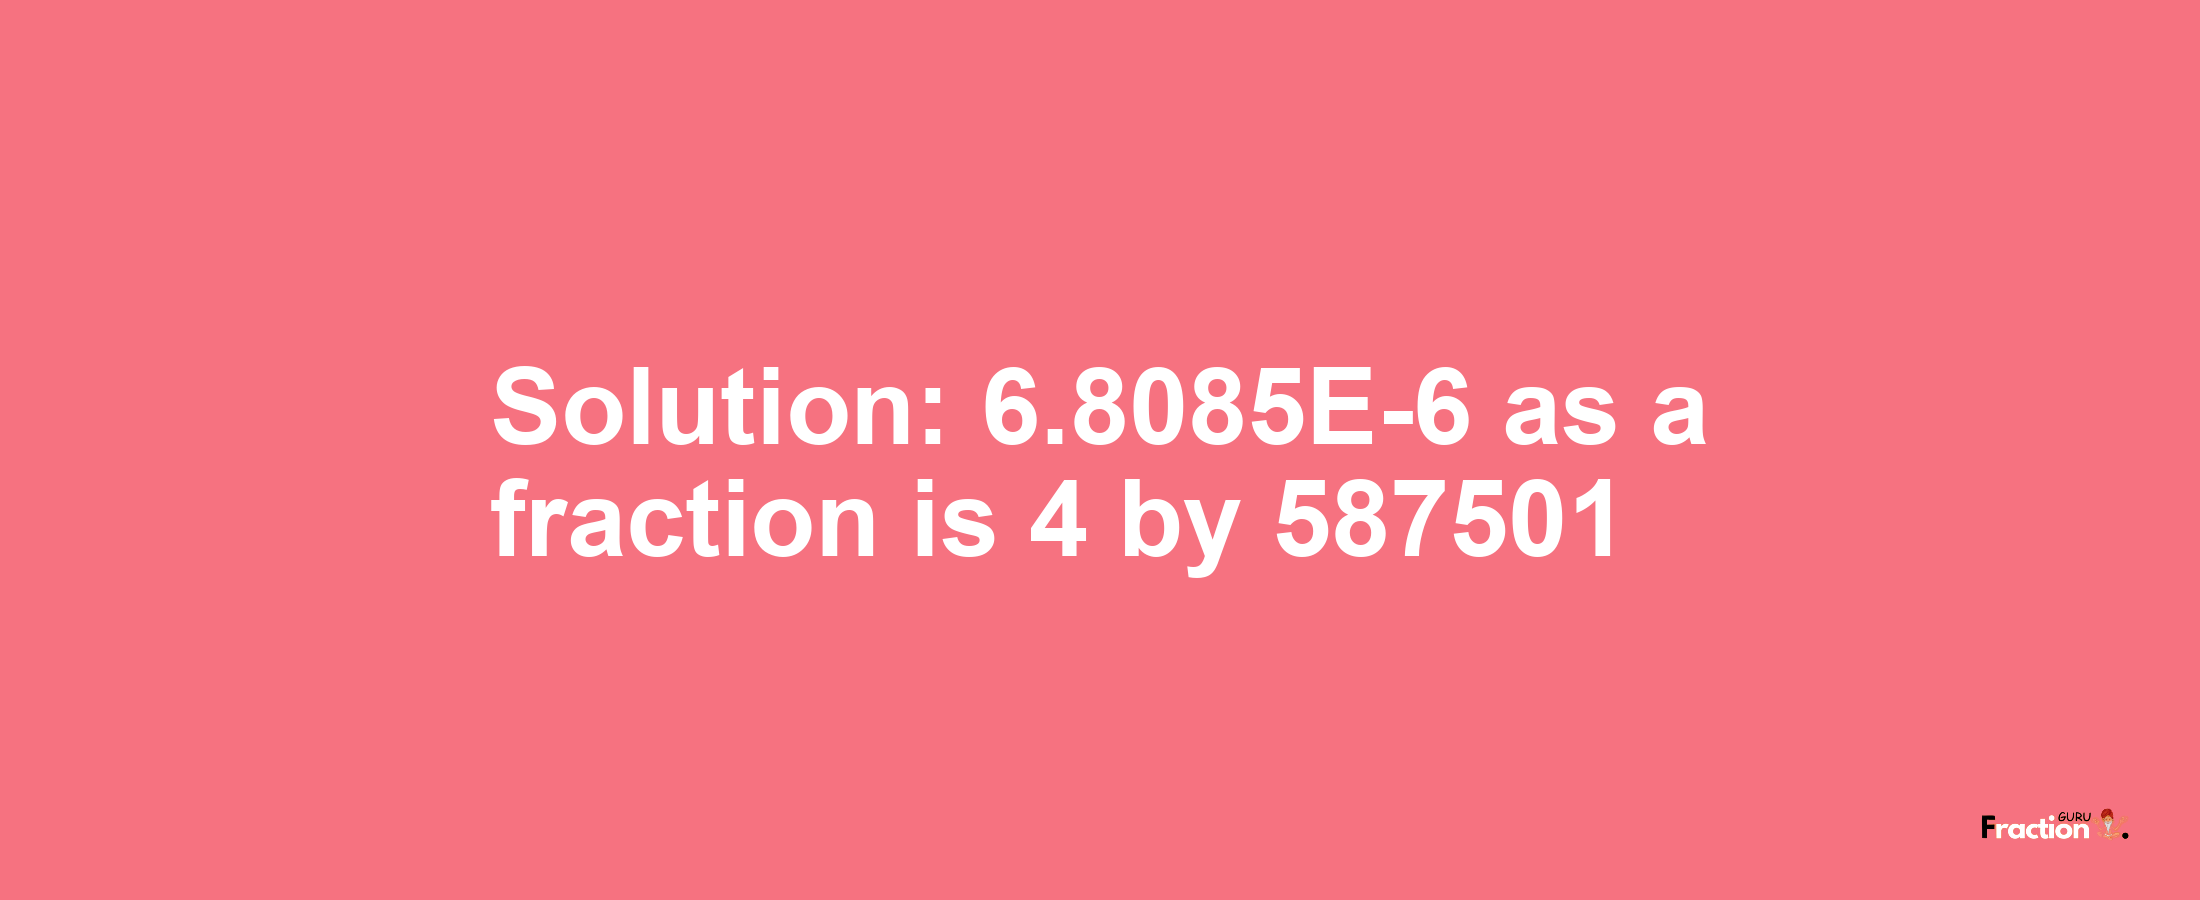 Solution:6.8085E-6 as a fraction is 4/587501